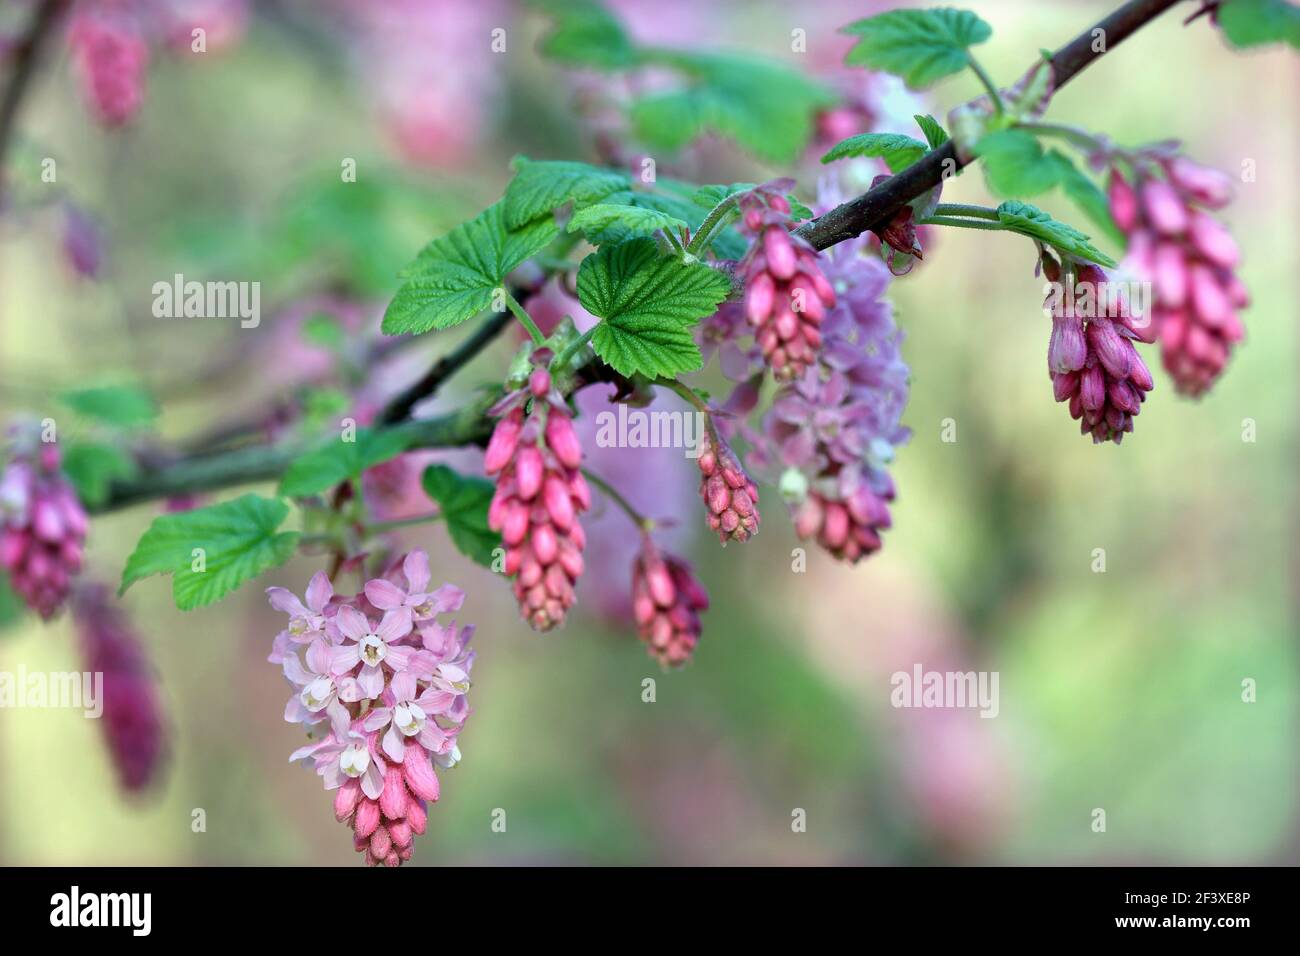 Ribes sanguineum (Latin for blood red).  A single stem of hanging flowers. Stock Photo